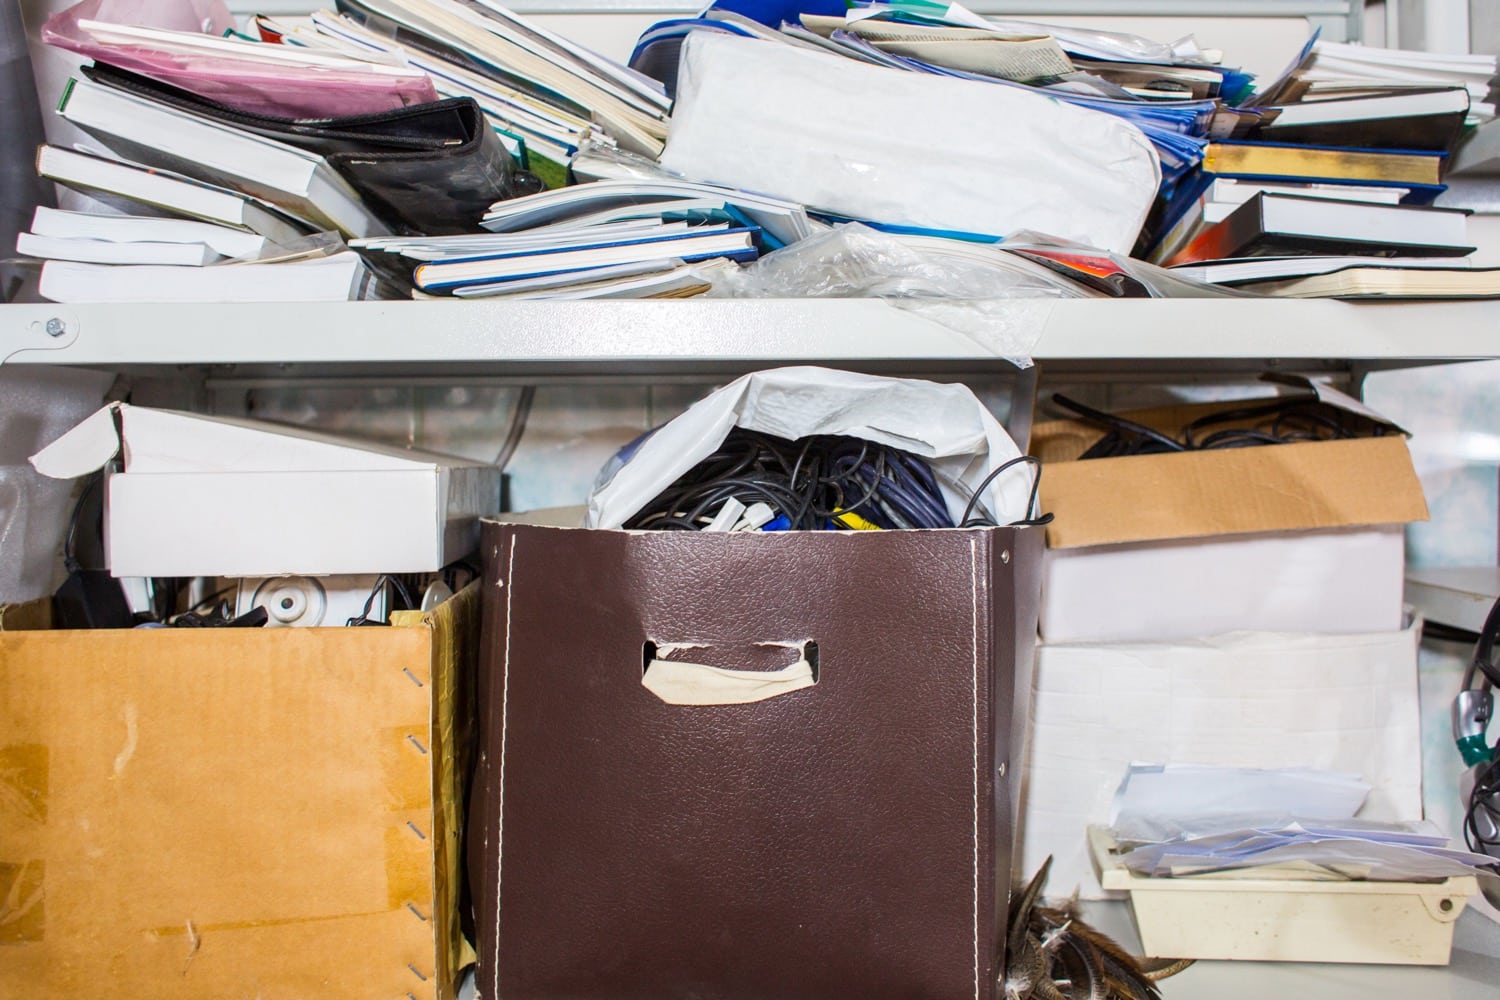 Cluttered document storage that will benefit from document indexing and scanning.